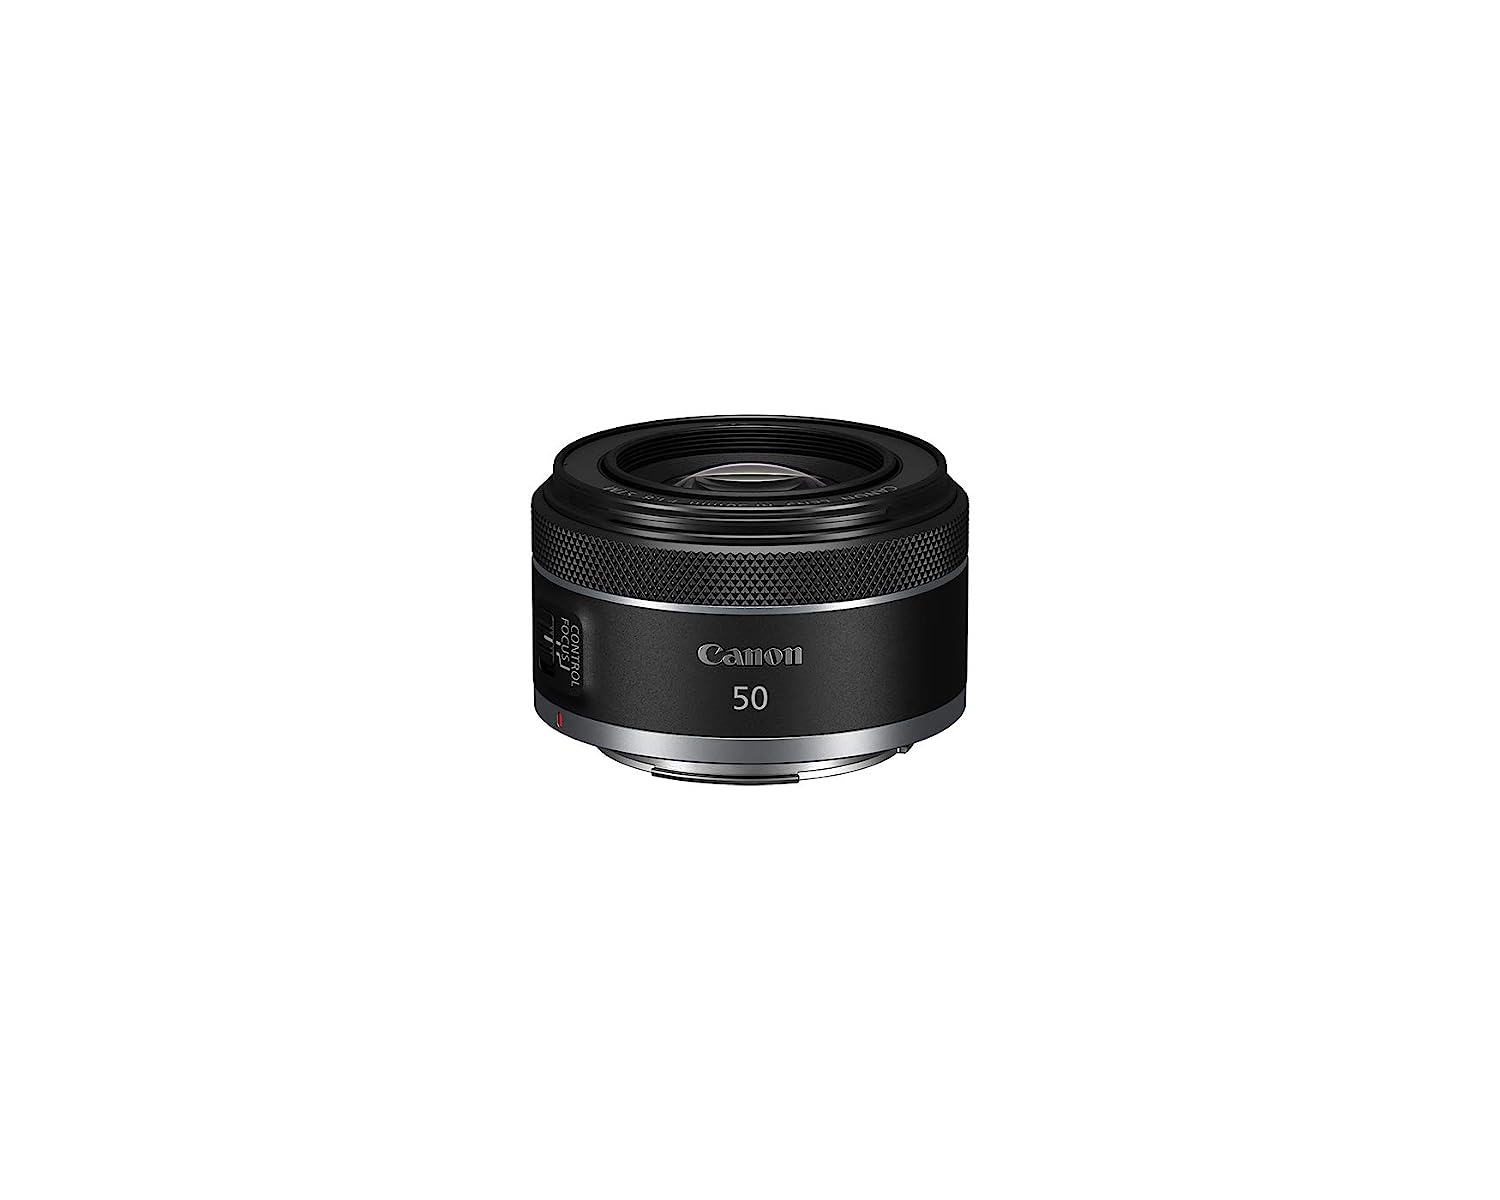 Used Canon Lens RF50mm F1.8 STM, Black, Compact 4515C002